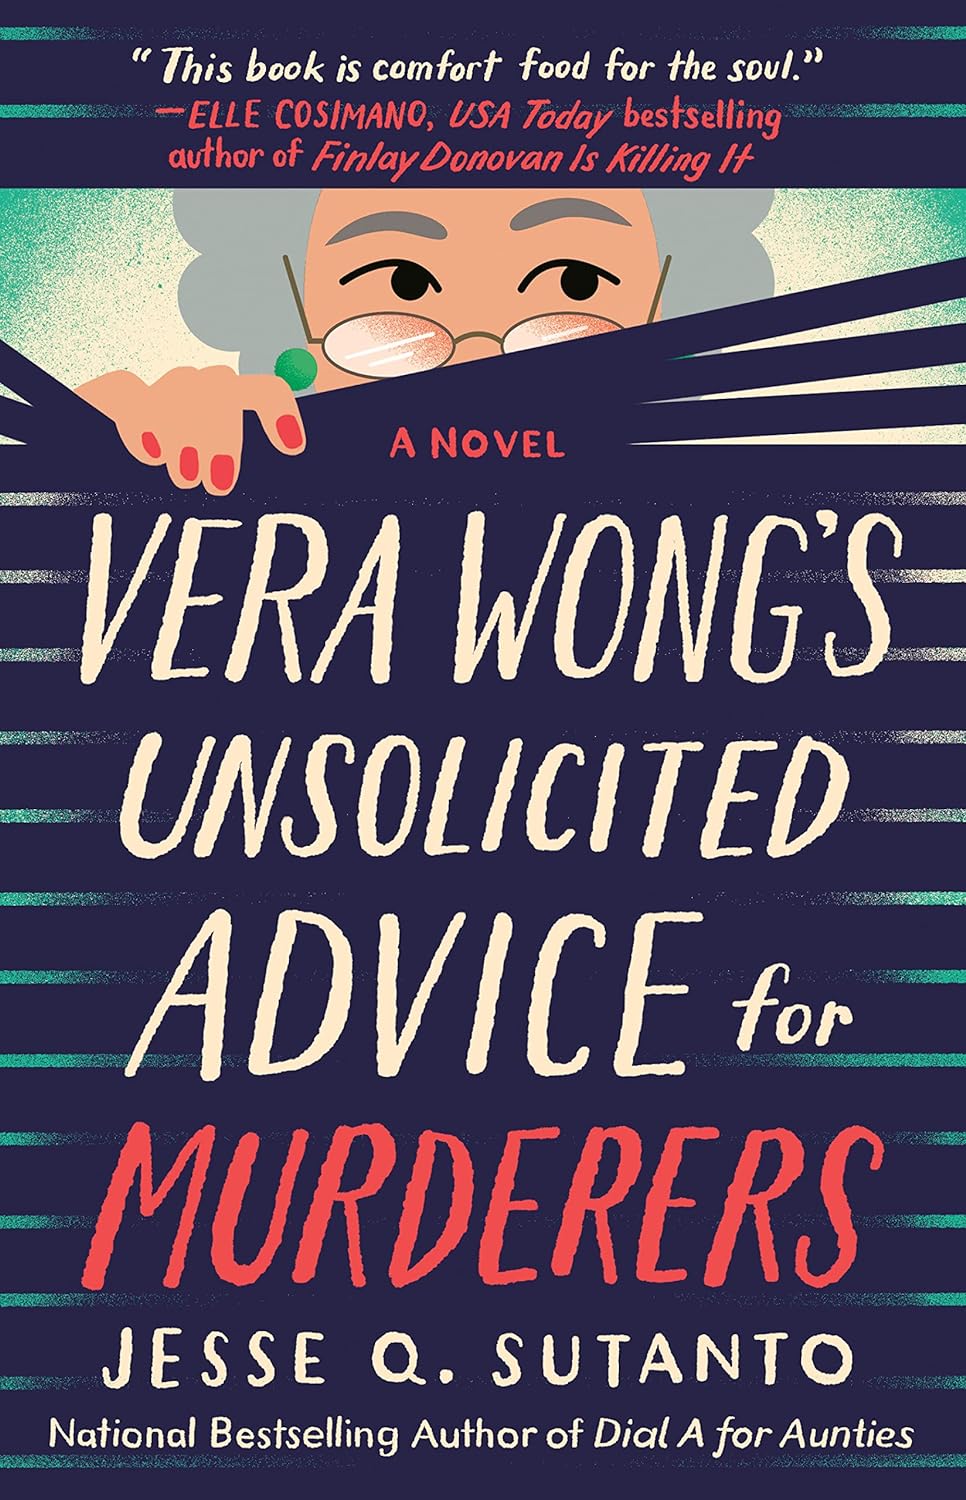 Image for "Vera Wong's Unsolicited Advice for Murderers: A Novel"